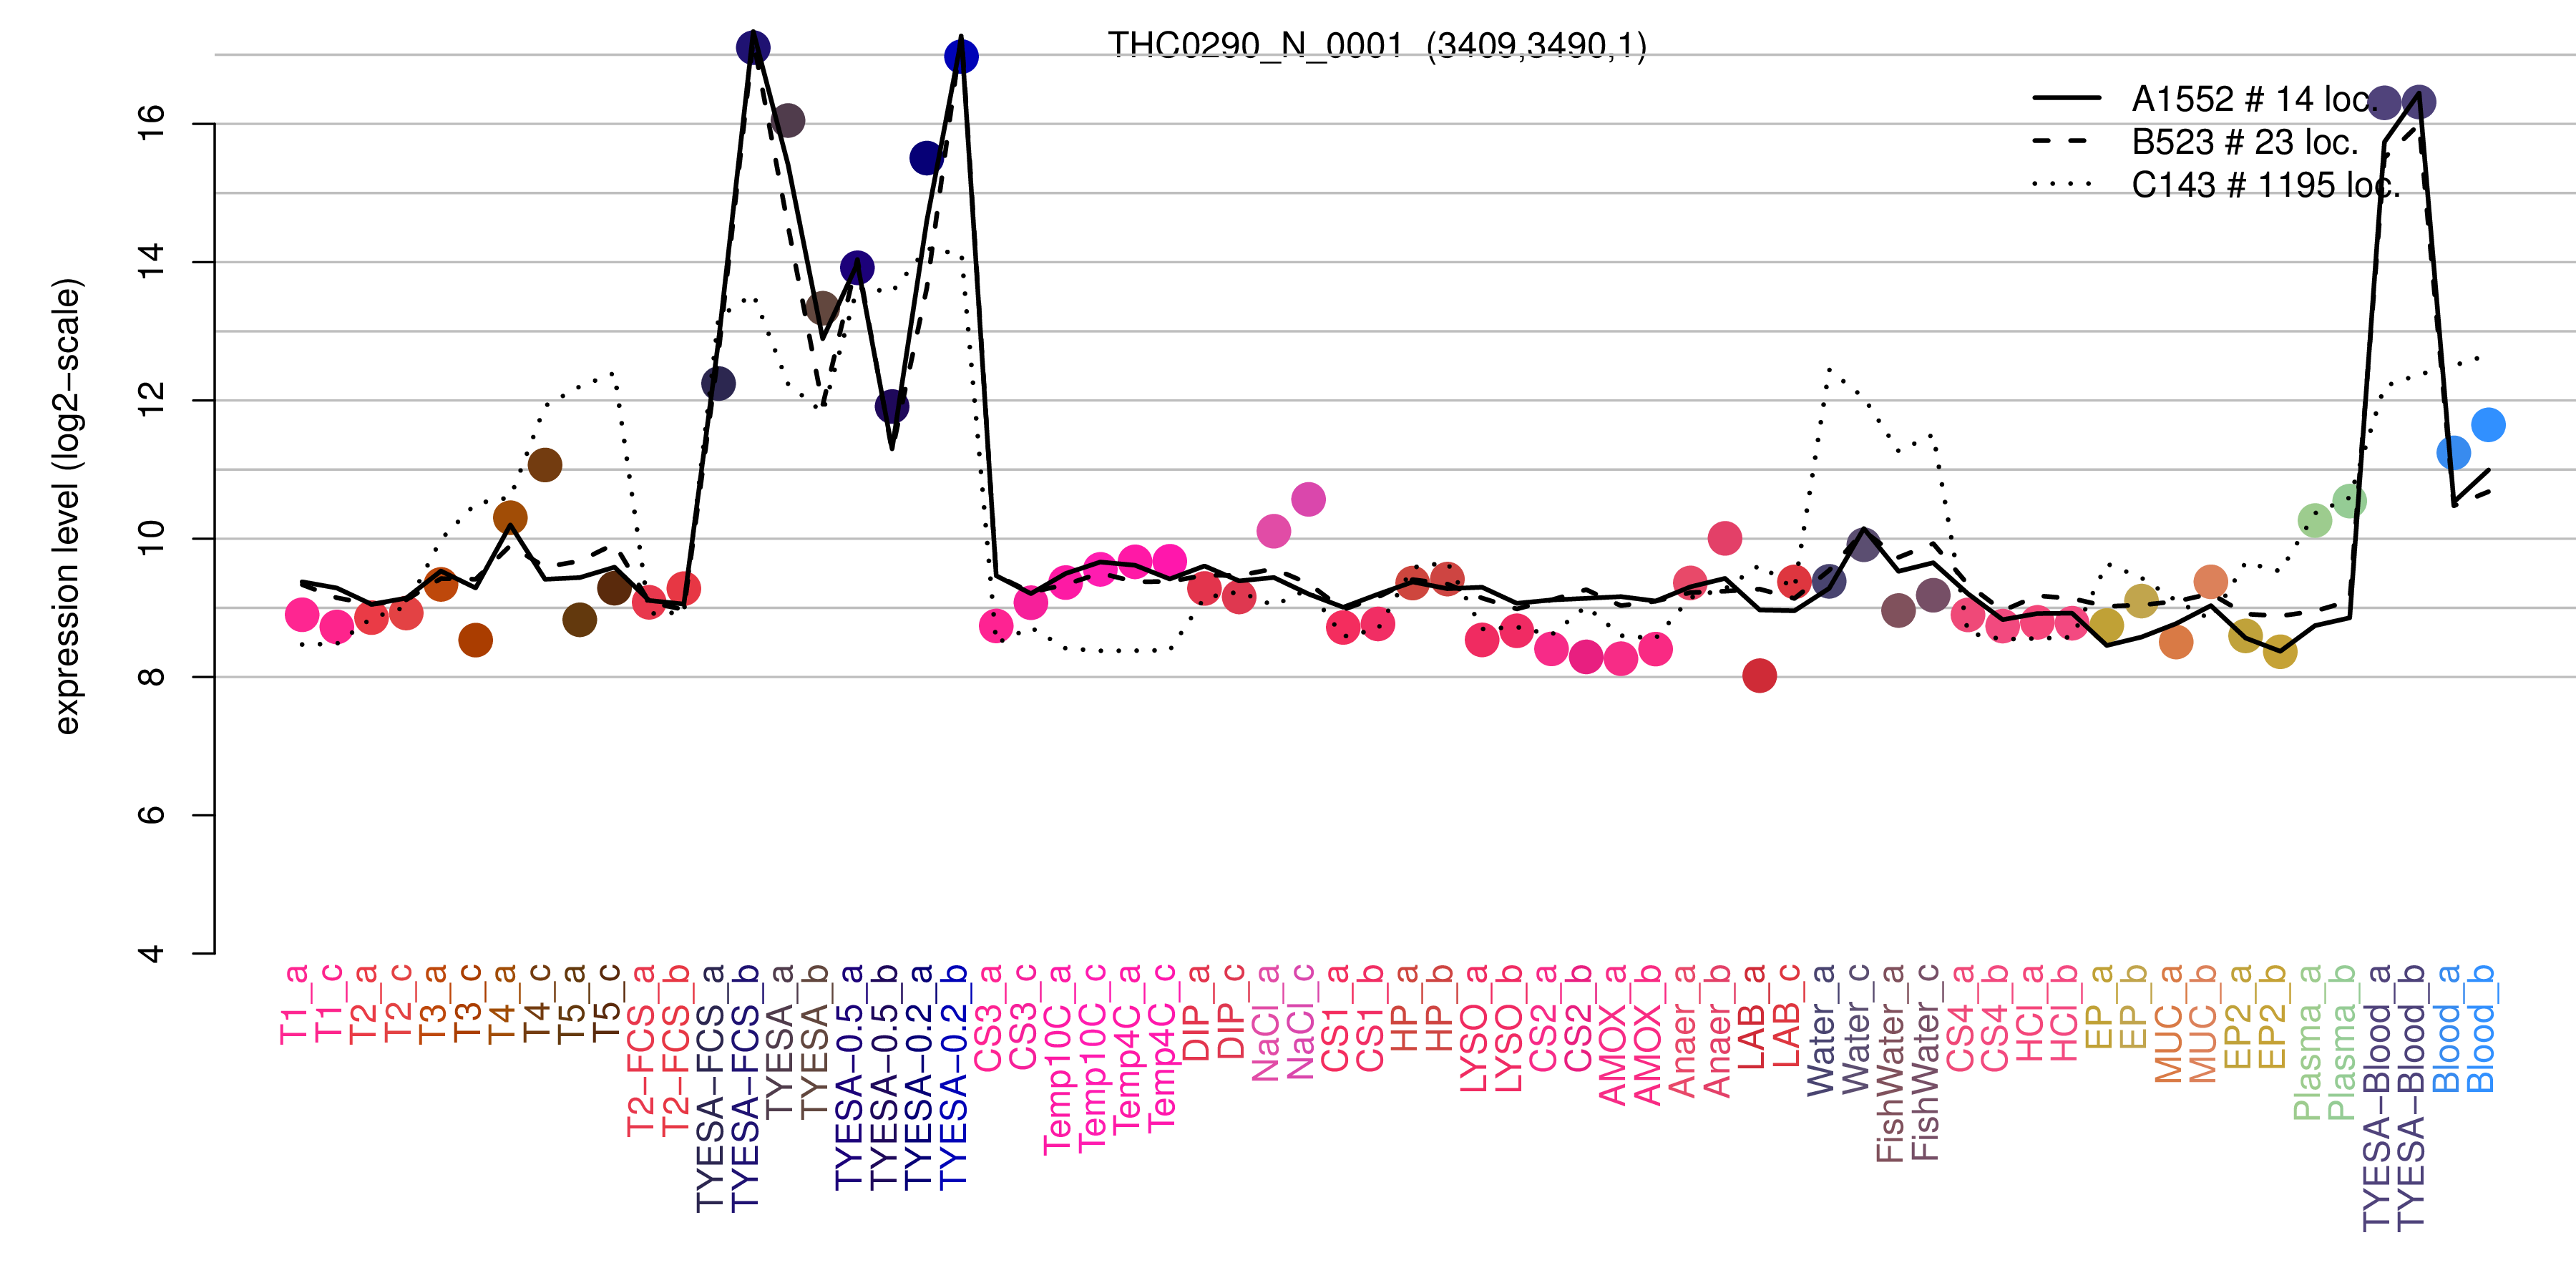 THC0290_N_0001 expression levels among conditions